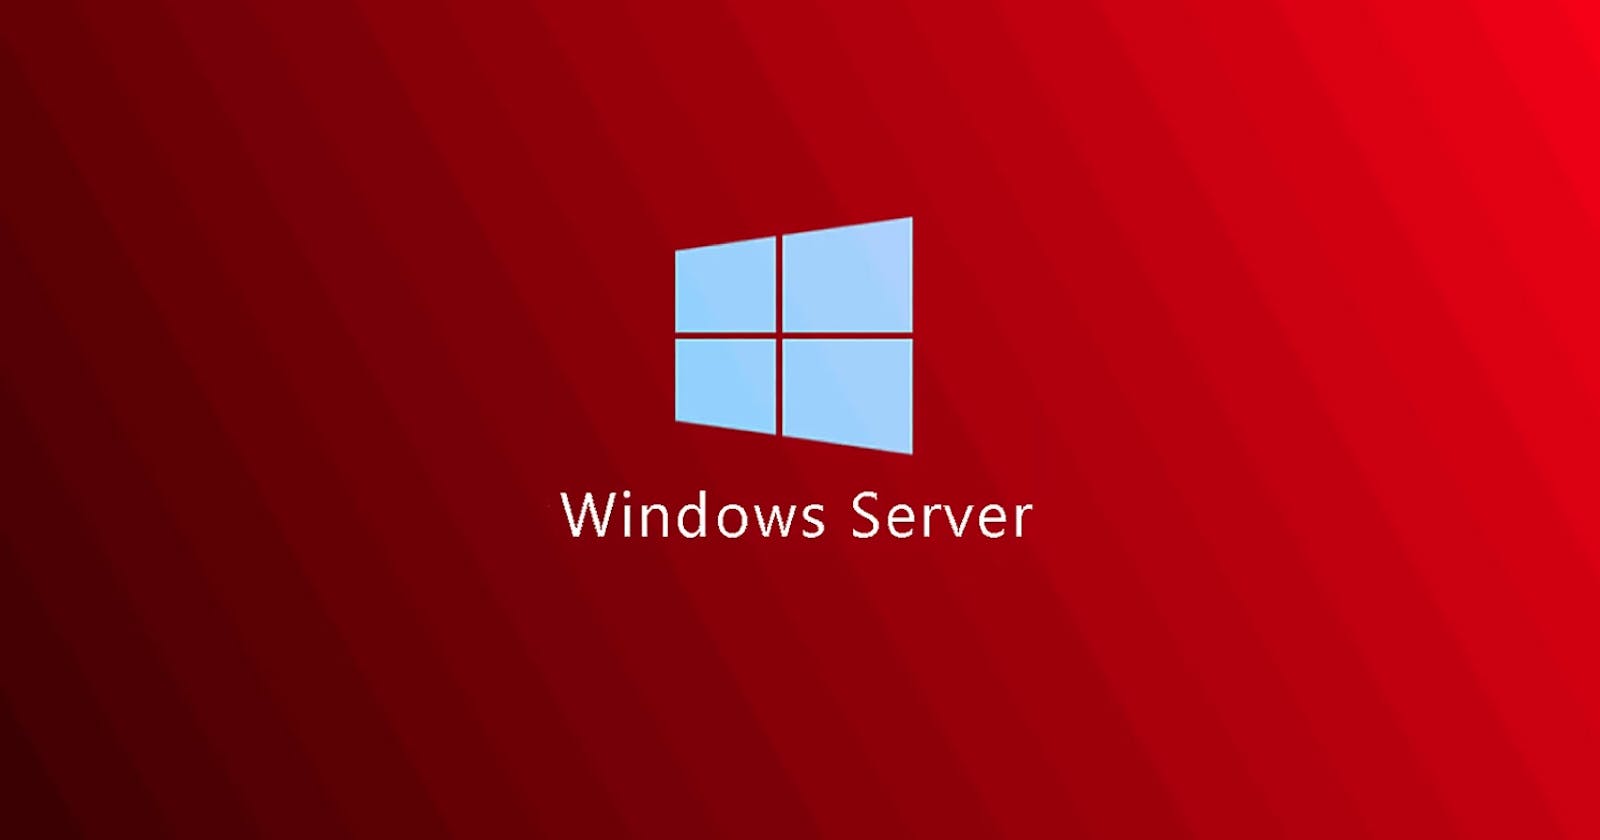 Microsoft confirms Windows Server issue behind domain controller crashes